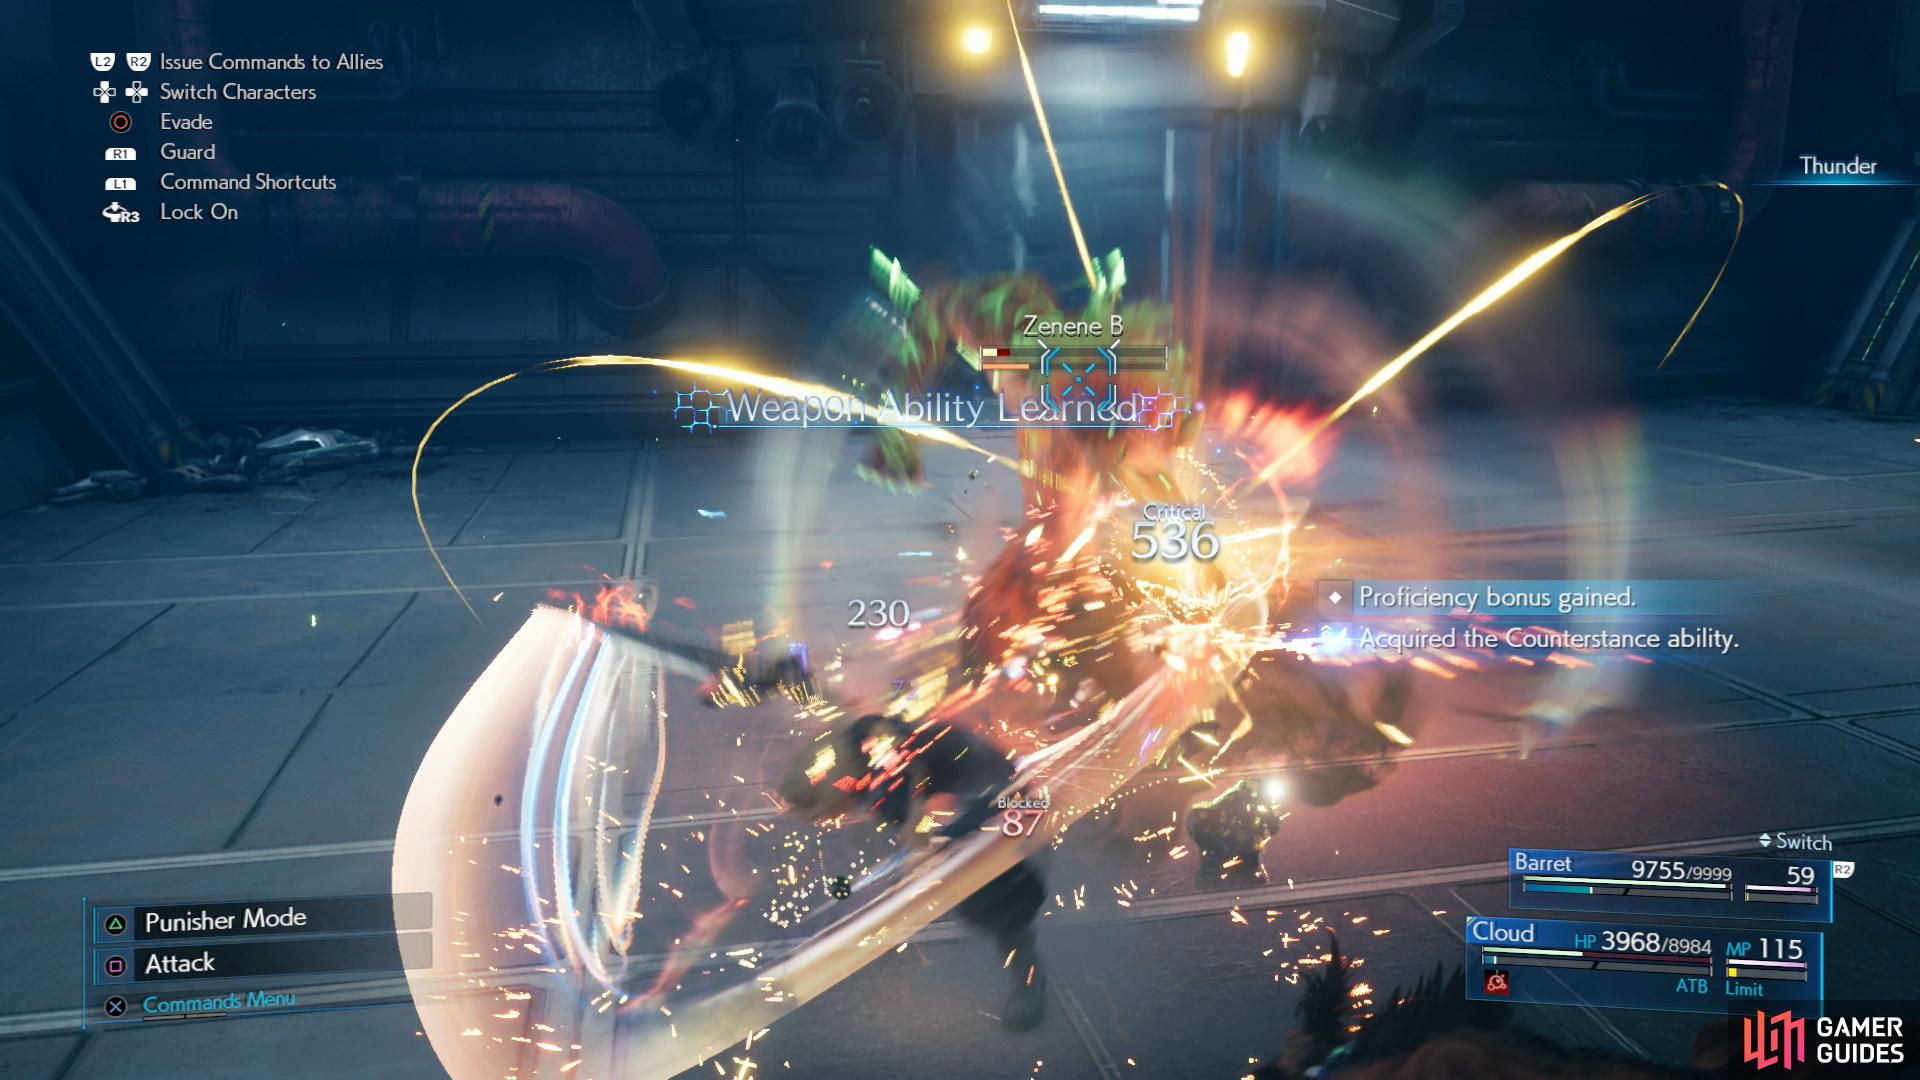 Cloud's Punisher mode counterattacks and Counterstance abilities makes fighting Zenenes much easier.